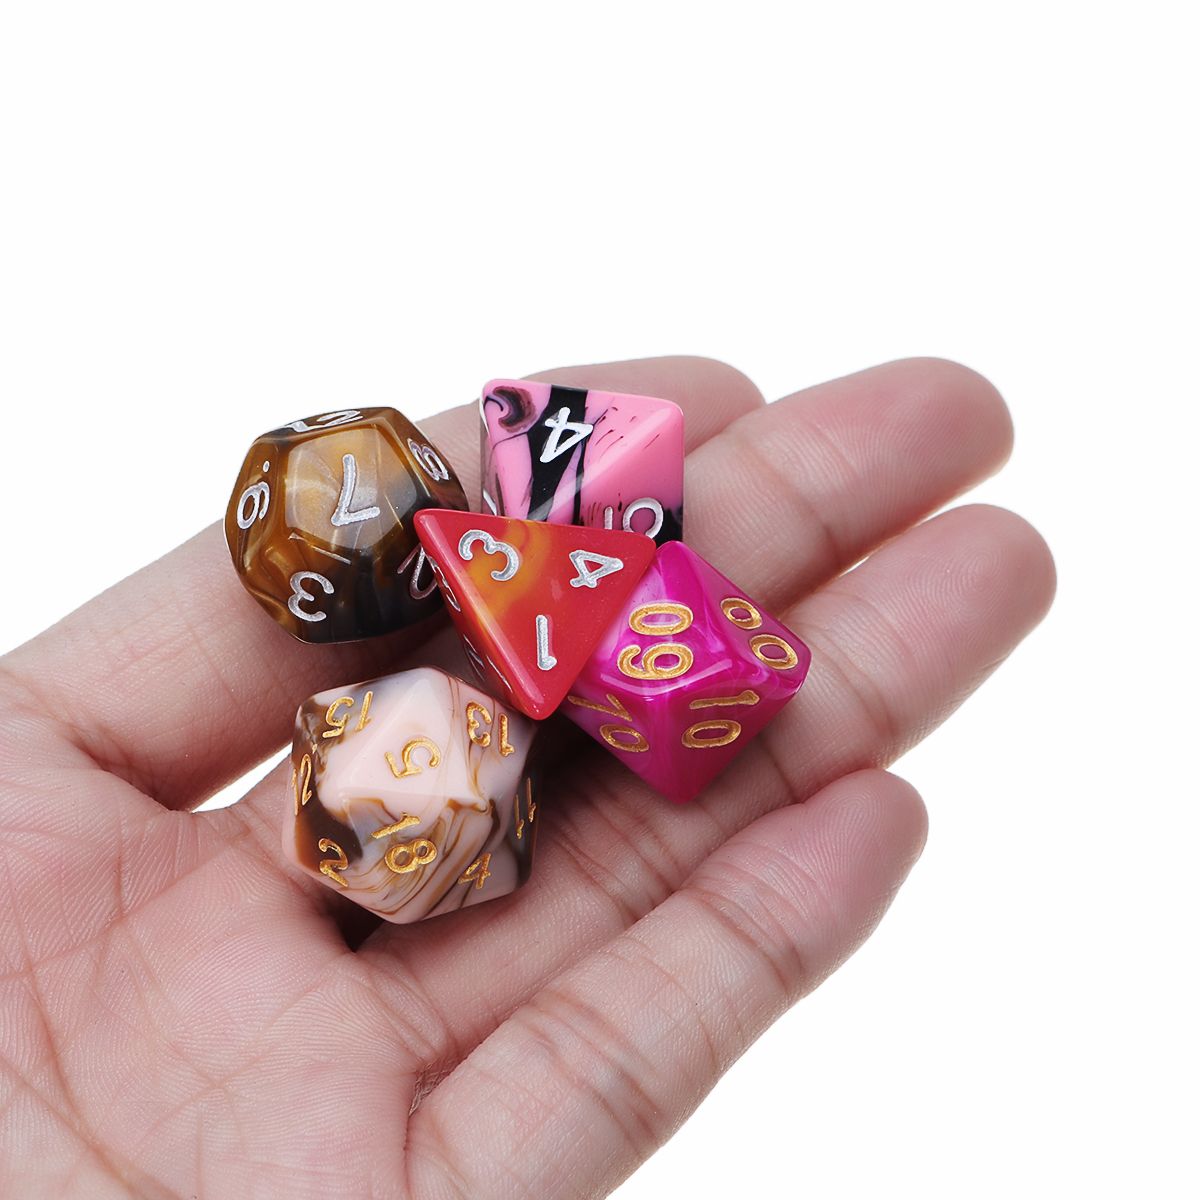 42Pcs-Polyhedral-Dice-Set-Multi-sied-Dices-For-Dungeons-amp-Dragons-DND-MTG-RPG-D4-D20-Game--Bag-1570778